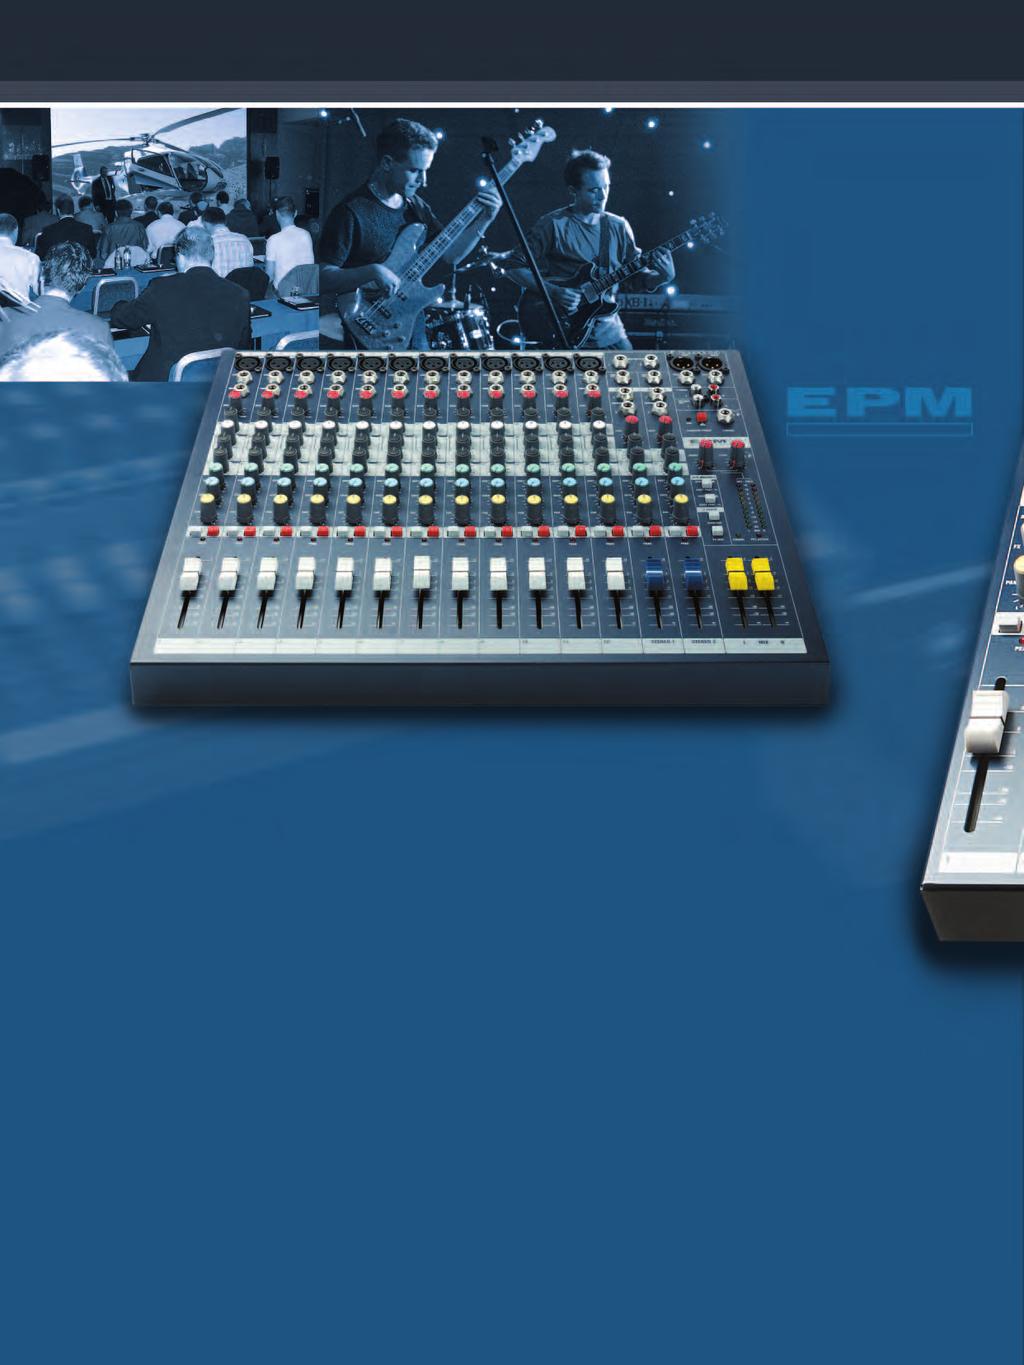 EPM/EFX SOUNDCRAFT SOUND QUALITY, PERFORMANCE AND VALUE FOR MONEY IN A VERSATILE RANGE OF MULTI PURPOSE MIXERS AVAILABLE WITH AND WITHOUT EFFECTS.